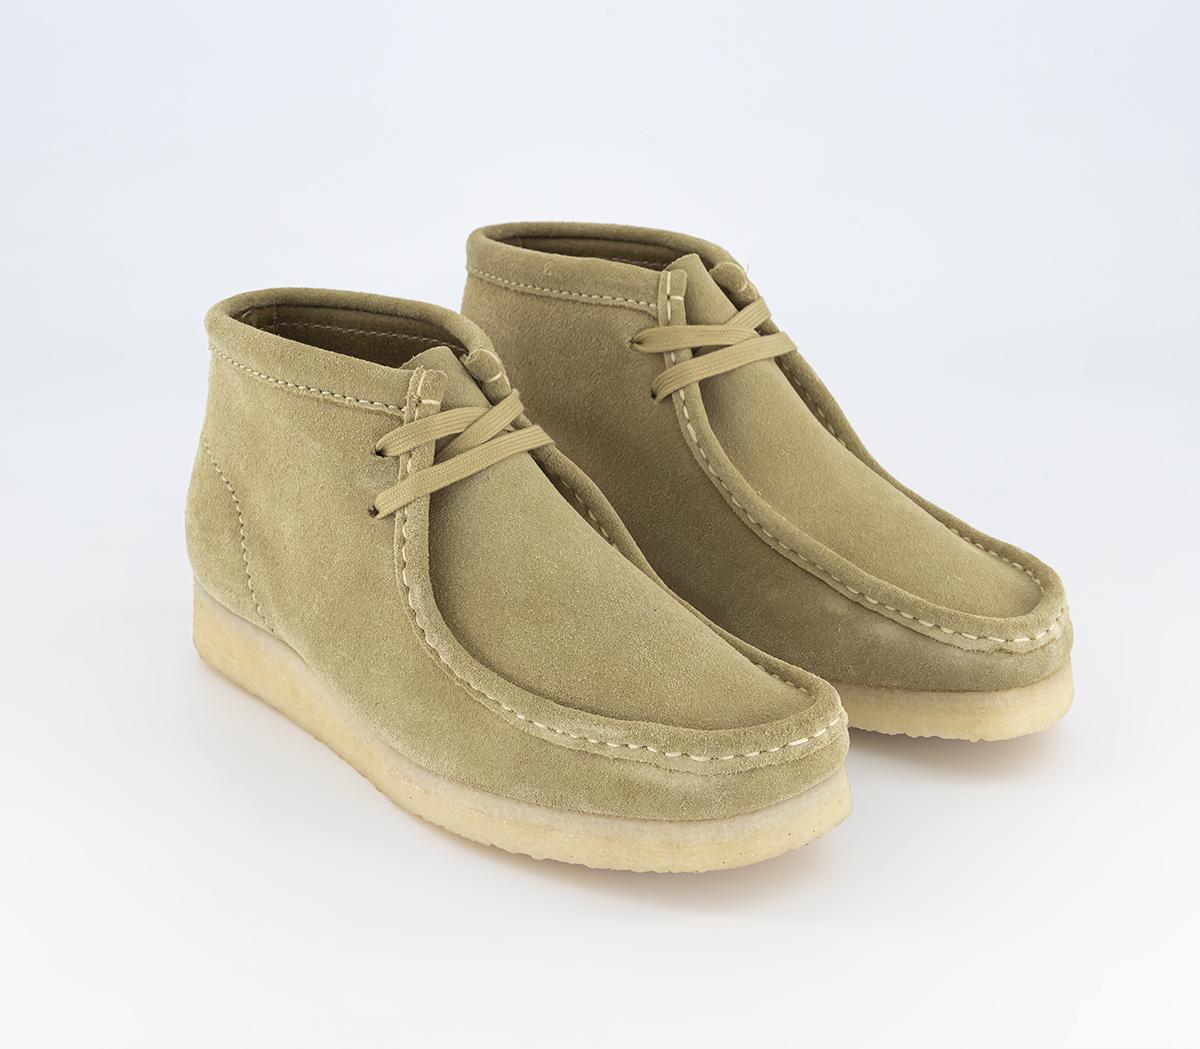 Clarks Originals Womens Wallabee Boot Maple Suede Natural, 3